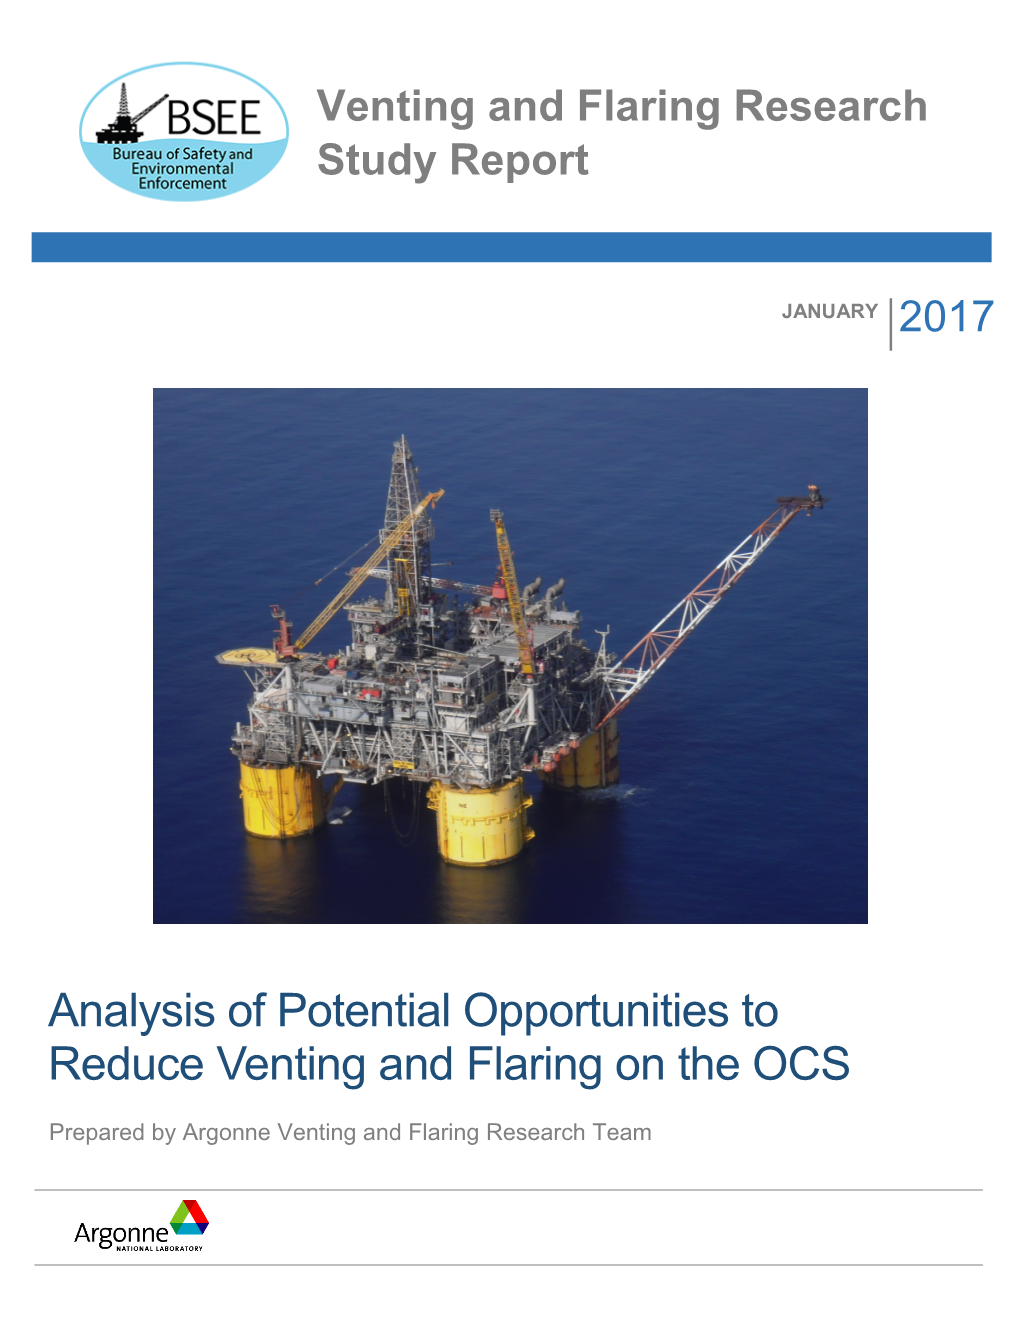 Analysis of Potential Opportunities to Reduce Venting and Flaring on the OCS